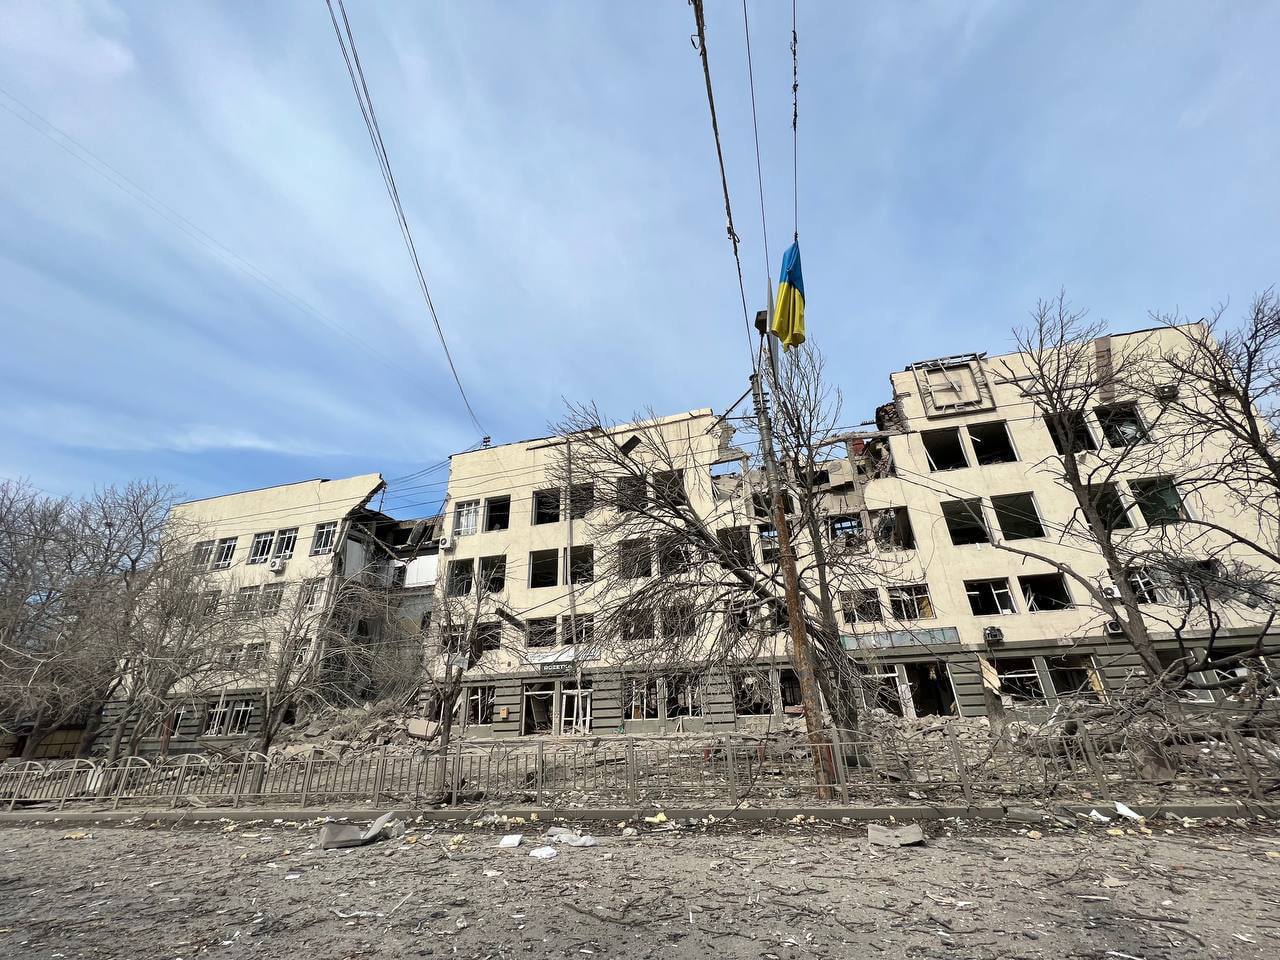 Mariupol after the shelling by the occupiers.